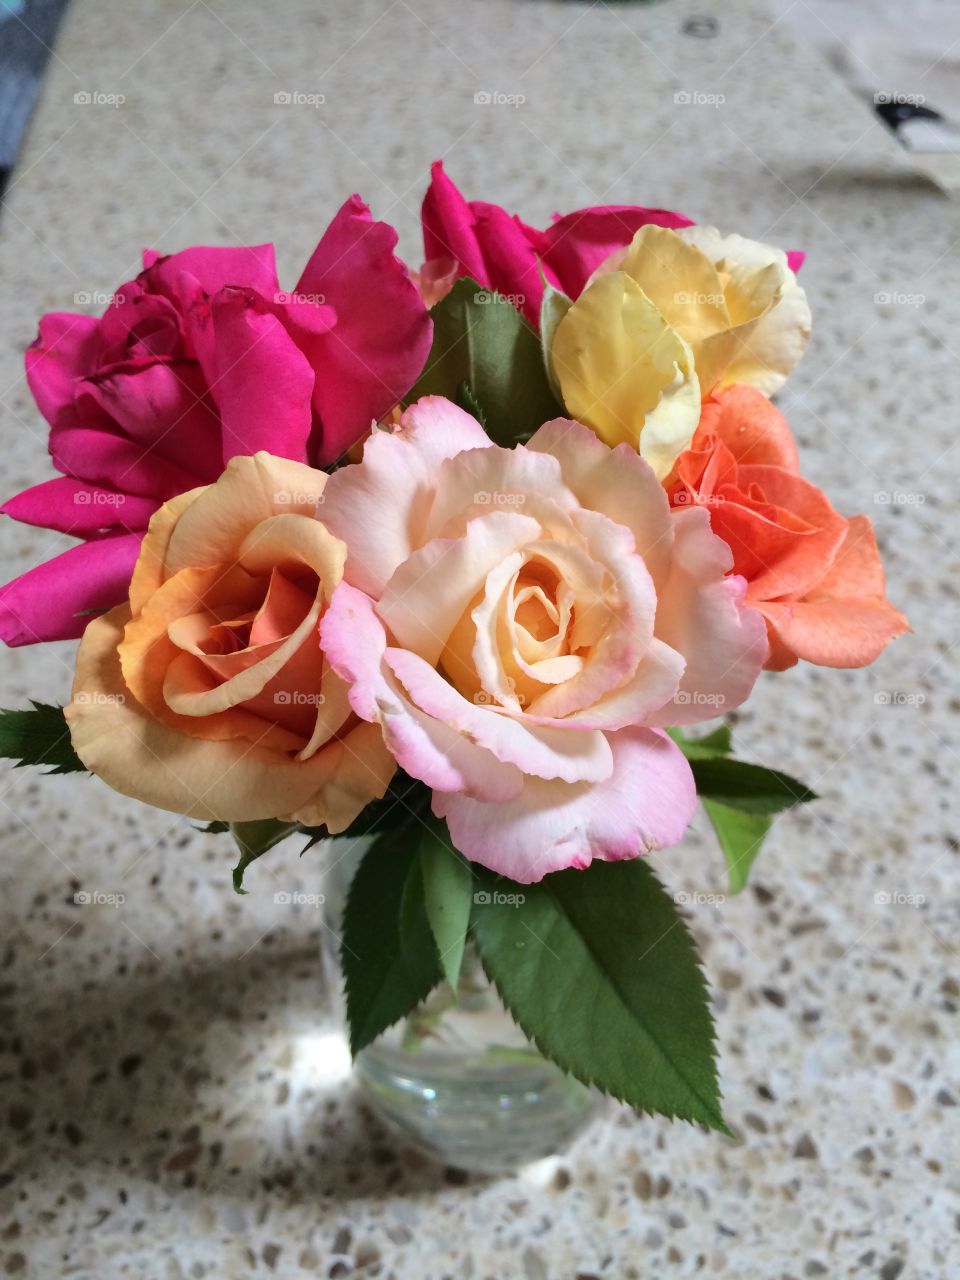 July Bouquet. Just picked roses from the garden.